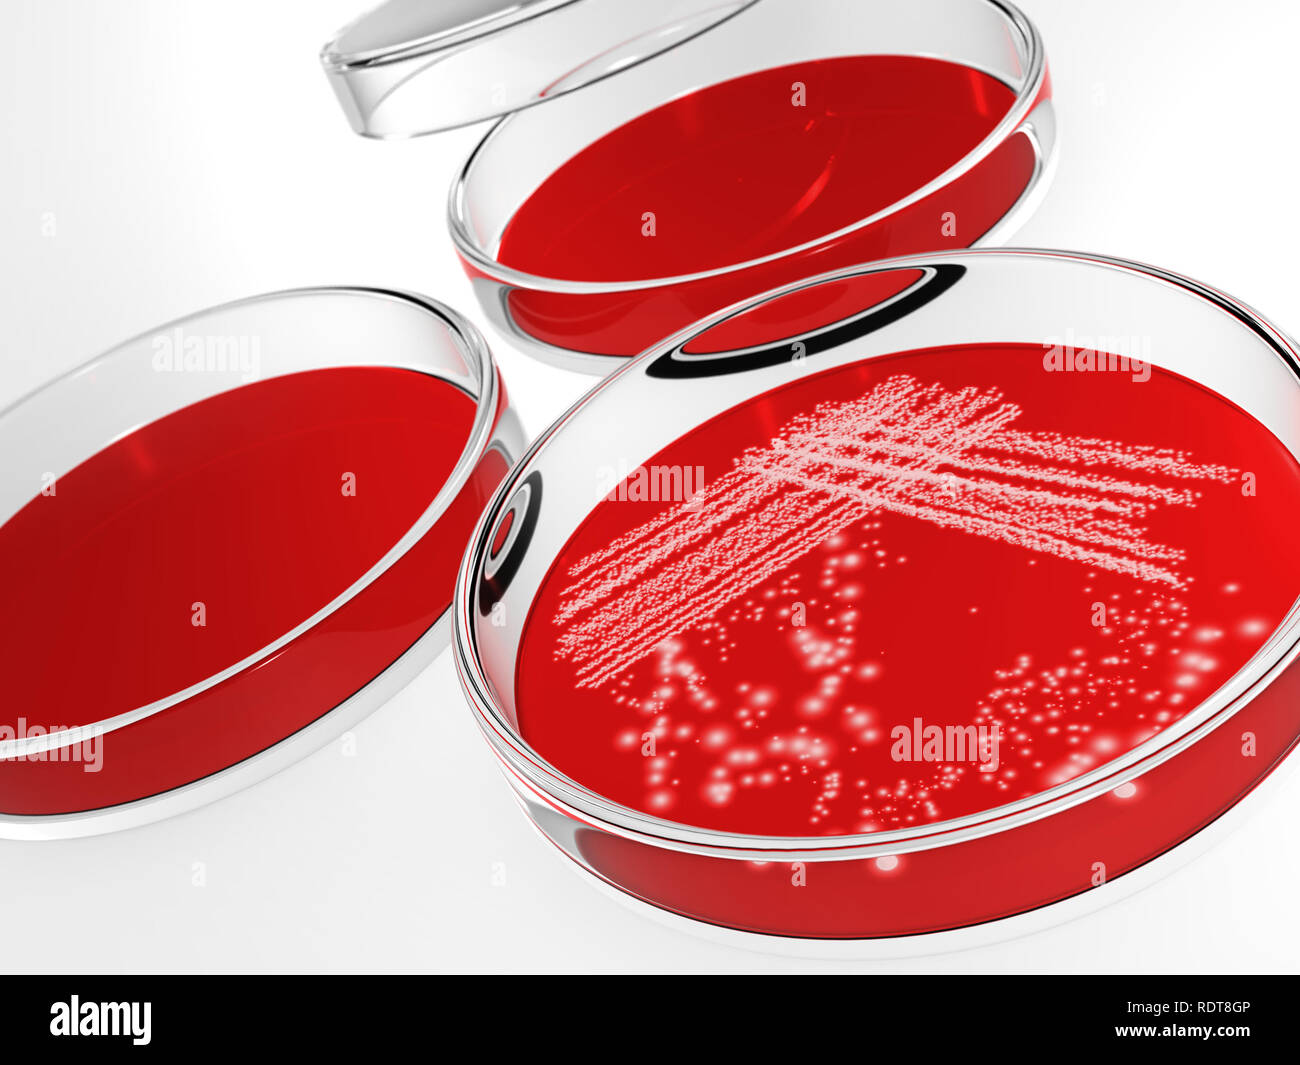 Petri dish with bacteria isolated on white background Stock Photo